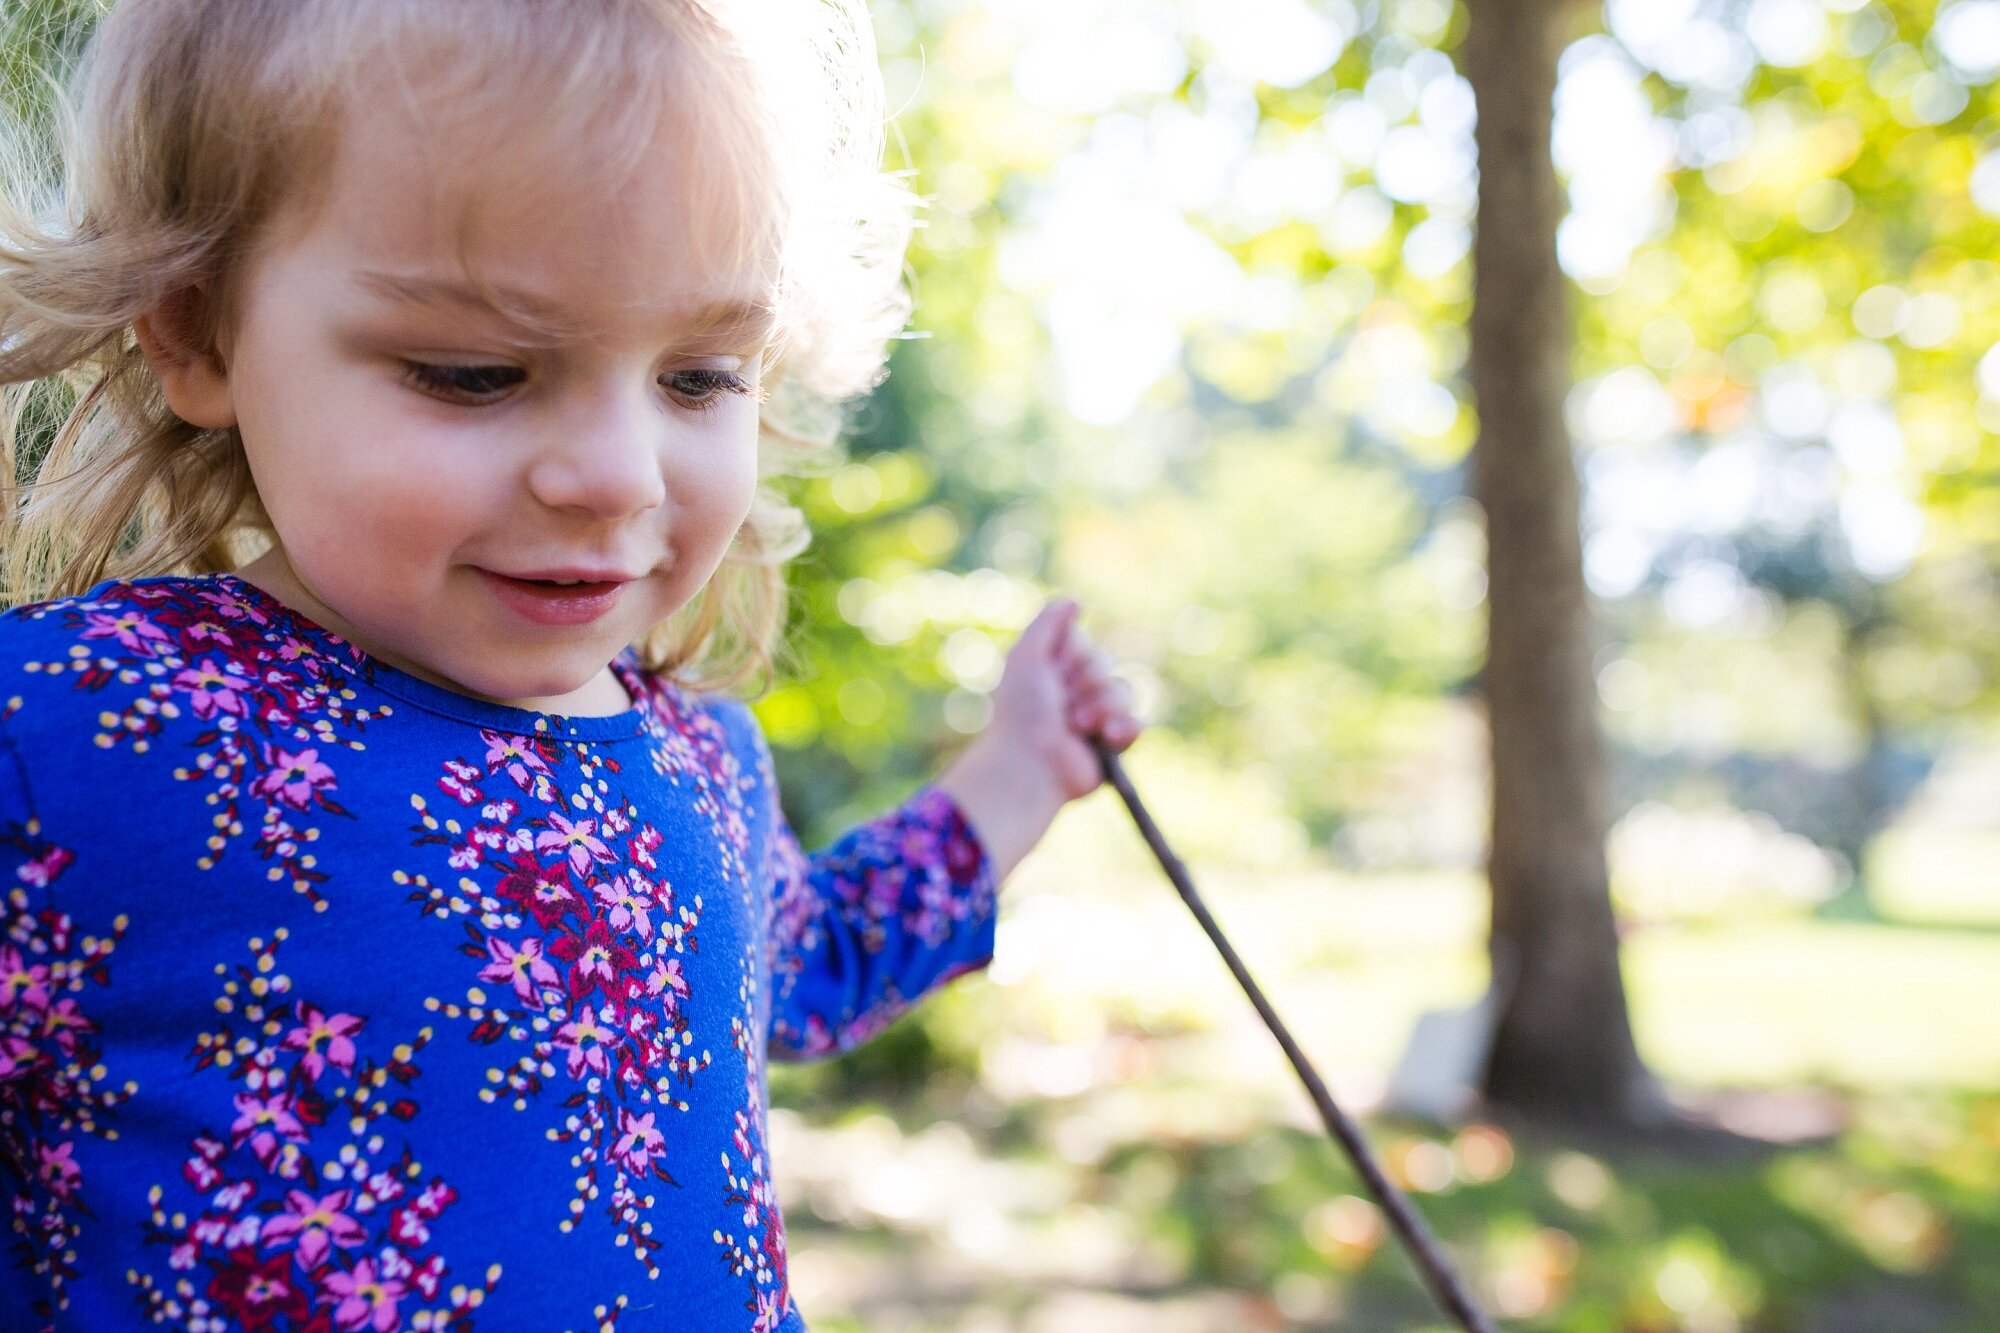 Three year old toddler girl plays with sticks in the park wearing a blue flower dress, Philadelphia Family Photography